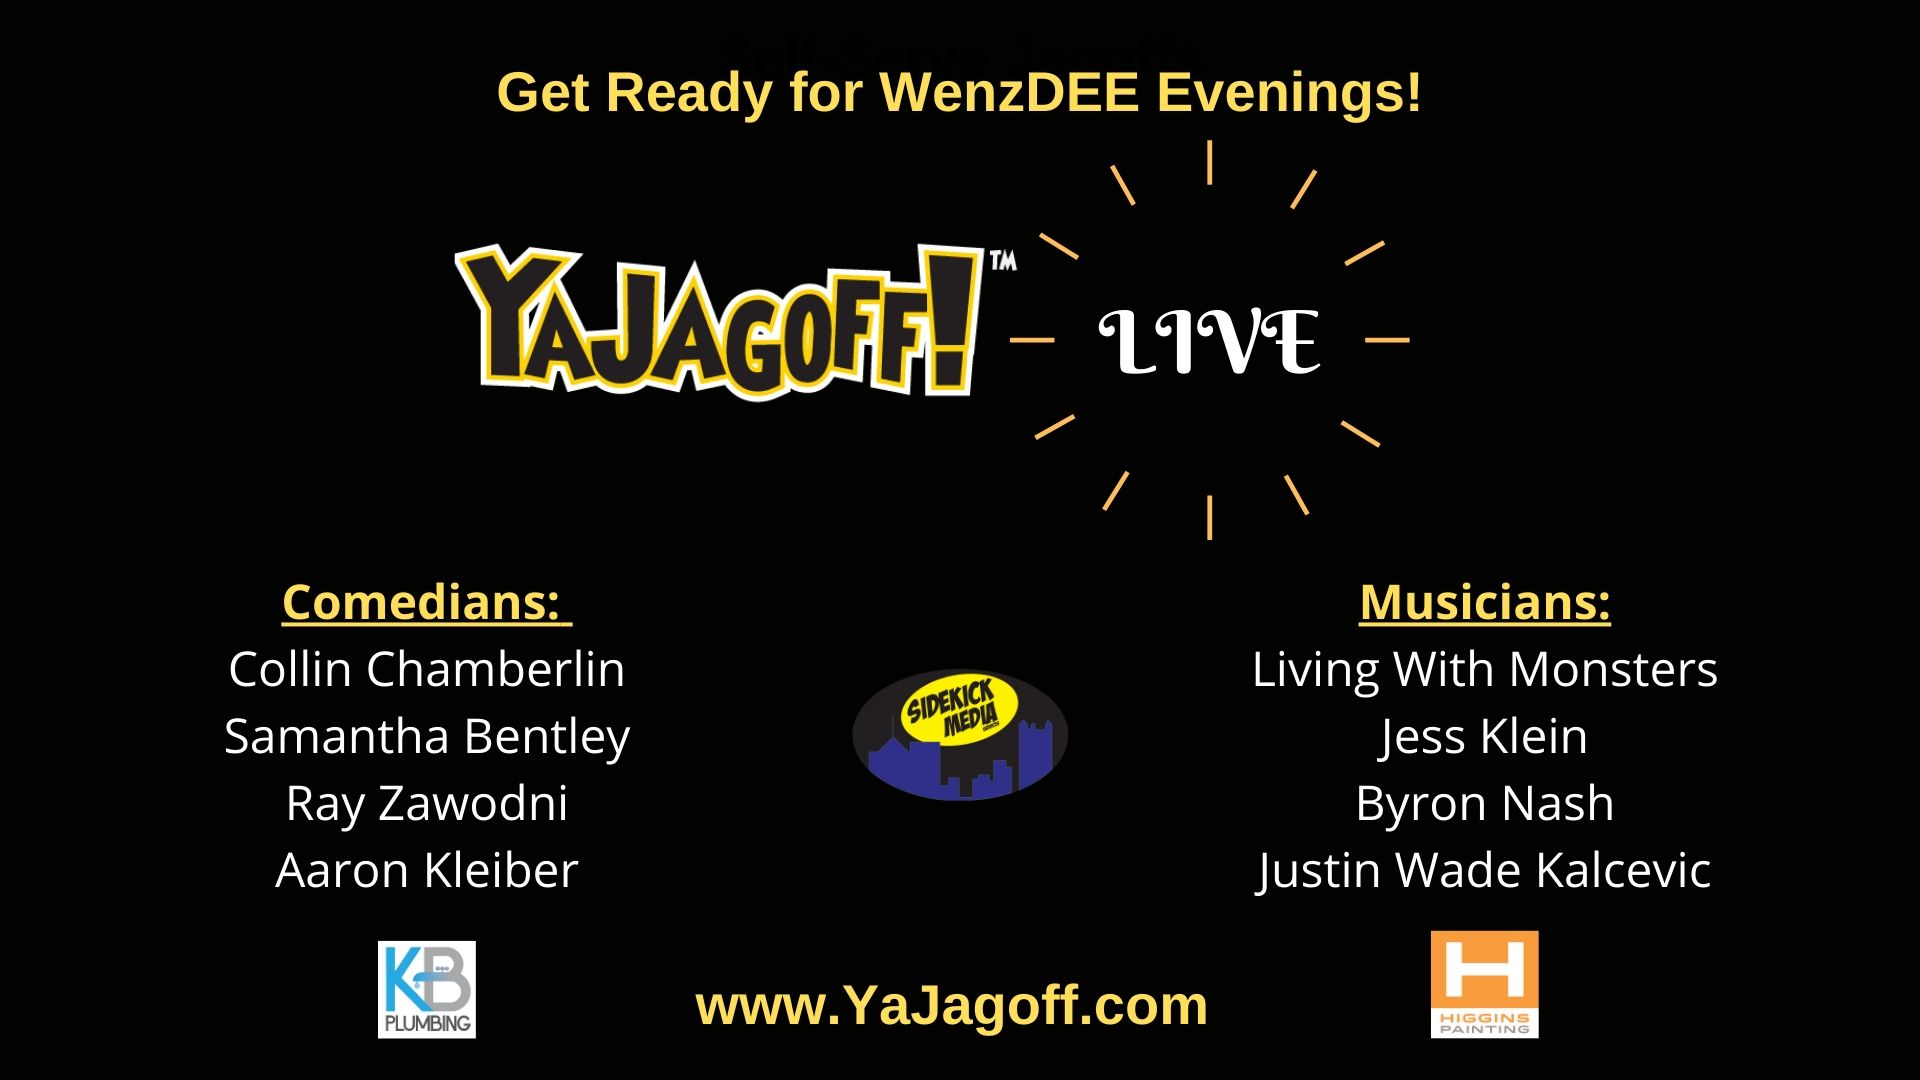 YaJagoff Live Coming with Comedians and Musicians